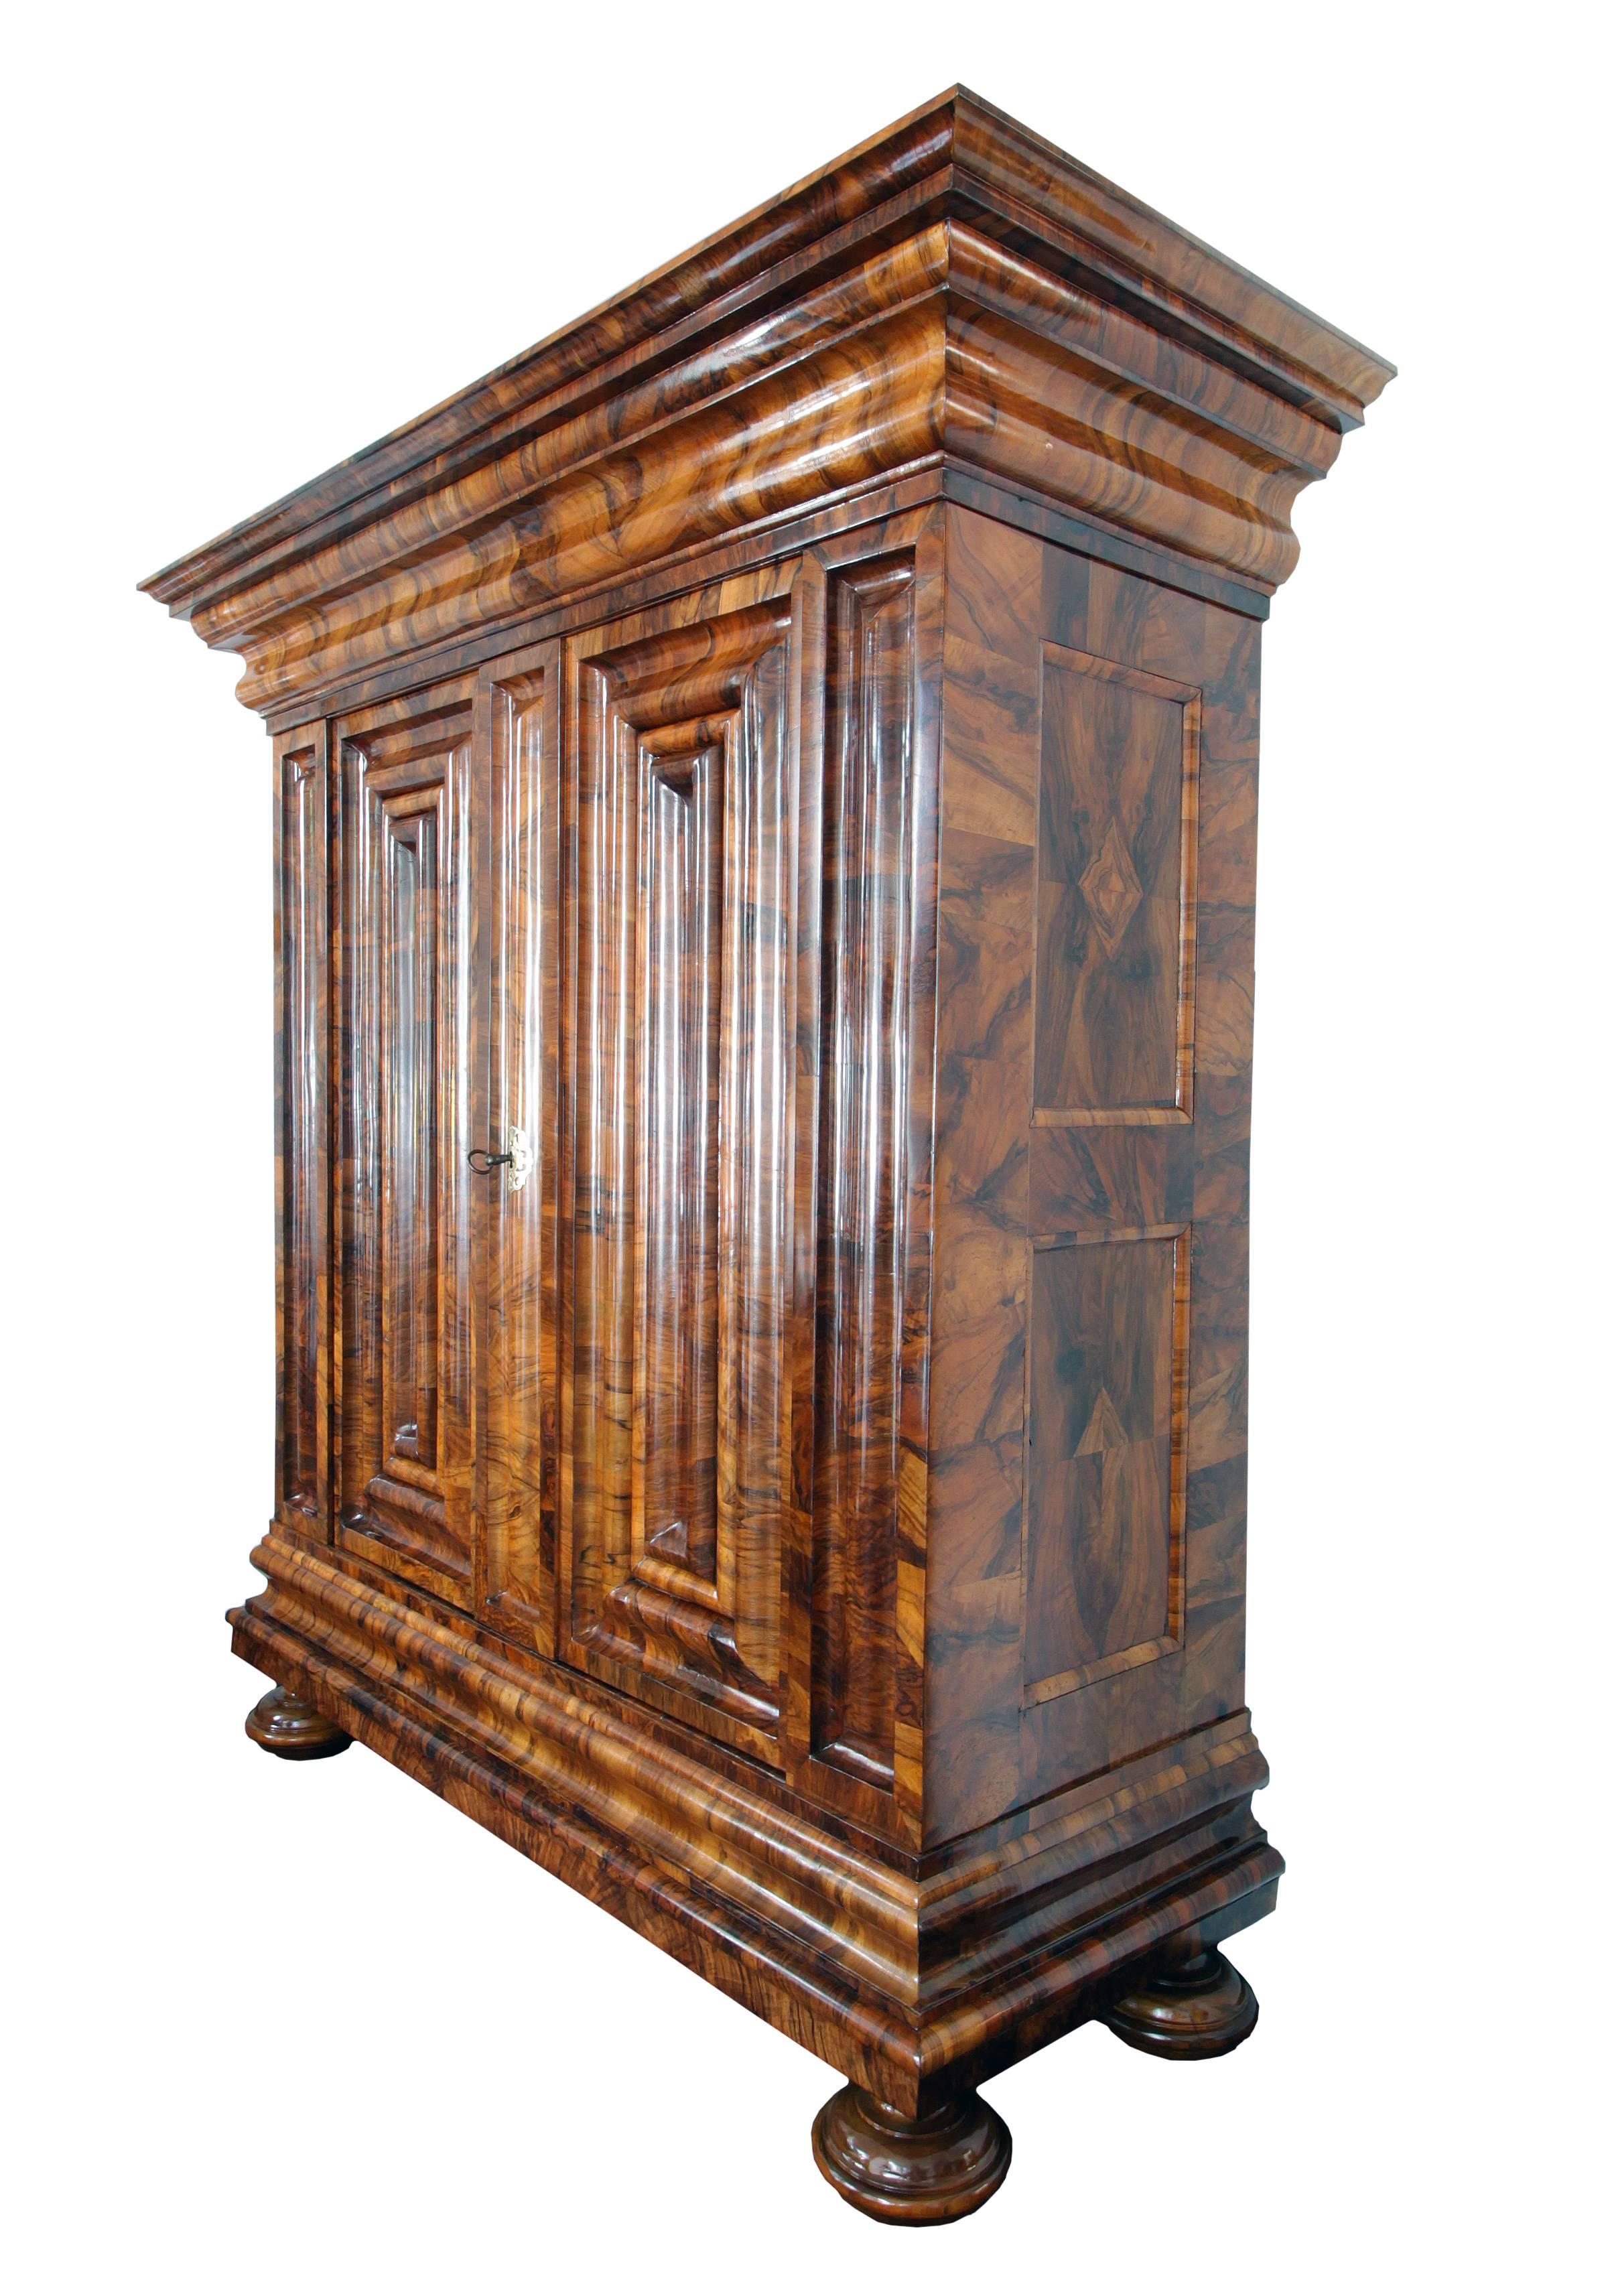 17th-18th Century Baroque Cabinet from Germany / Frankfurt 4